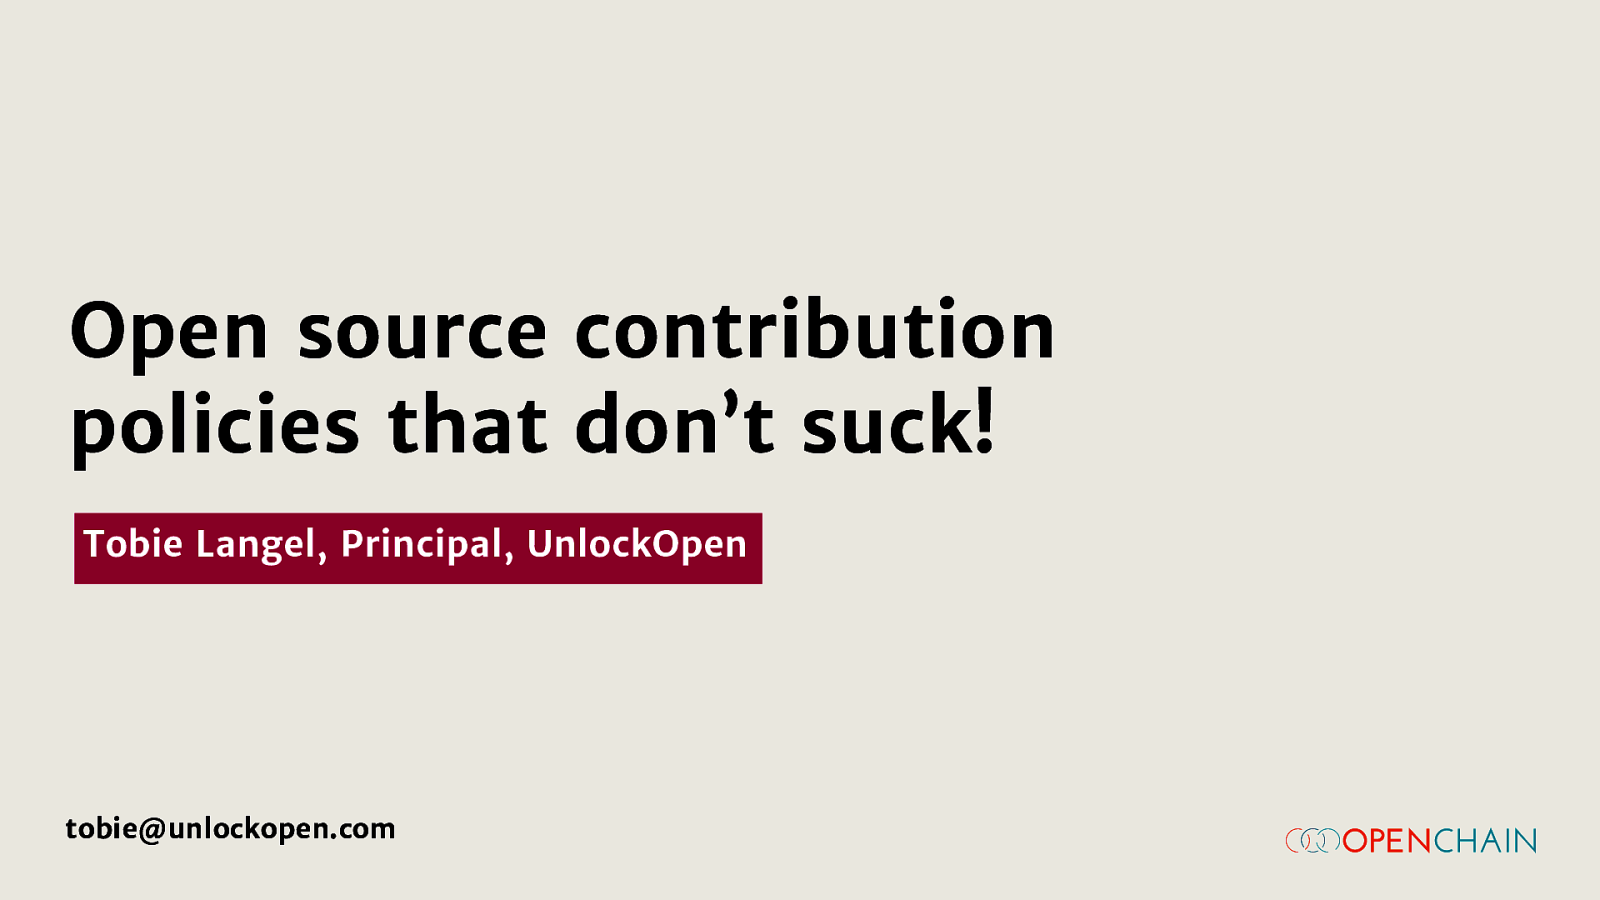 Open source contribution policies that don’t suck!